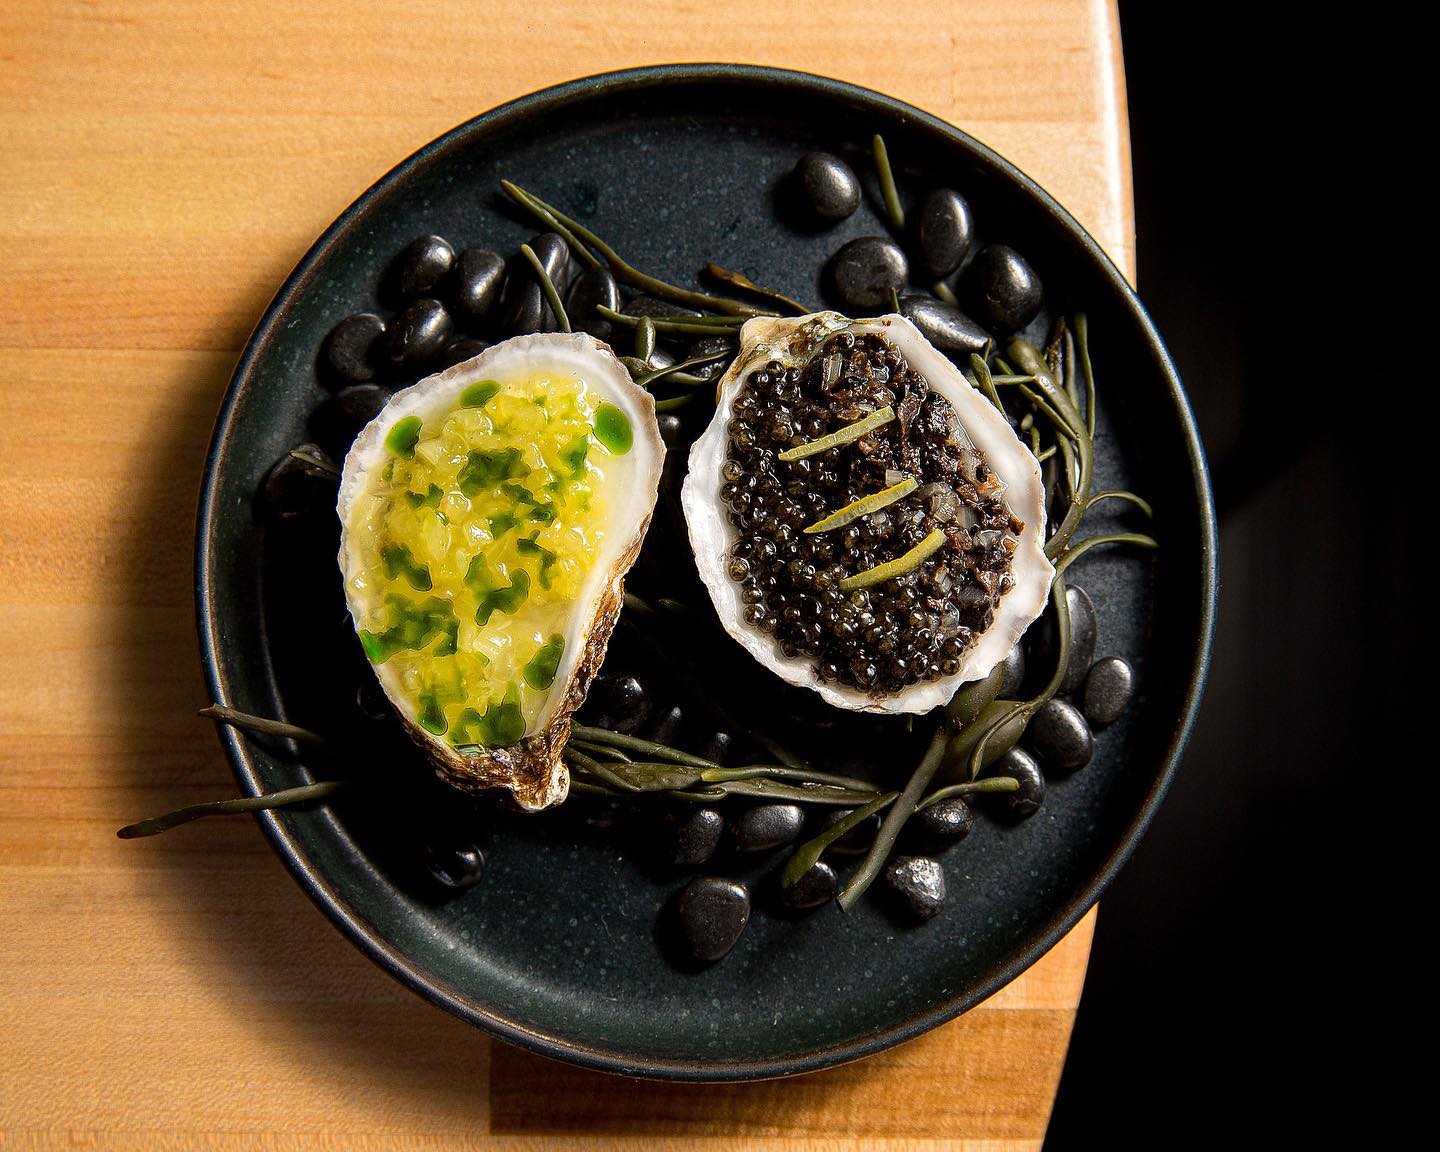 a black plate topped with an open oyster and black olives.